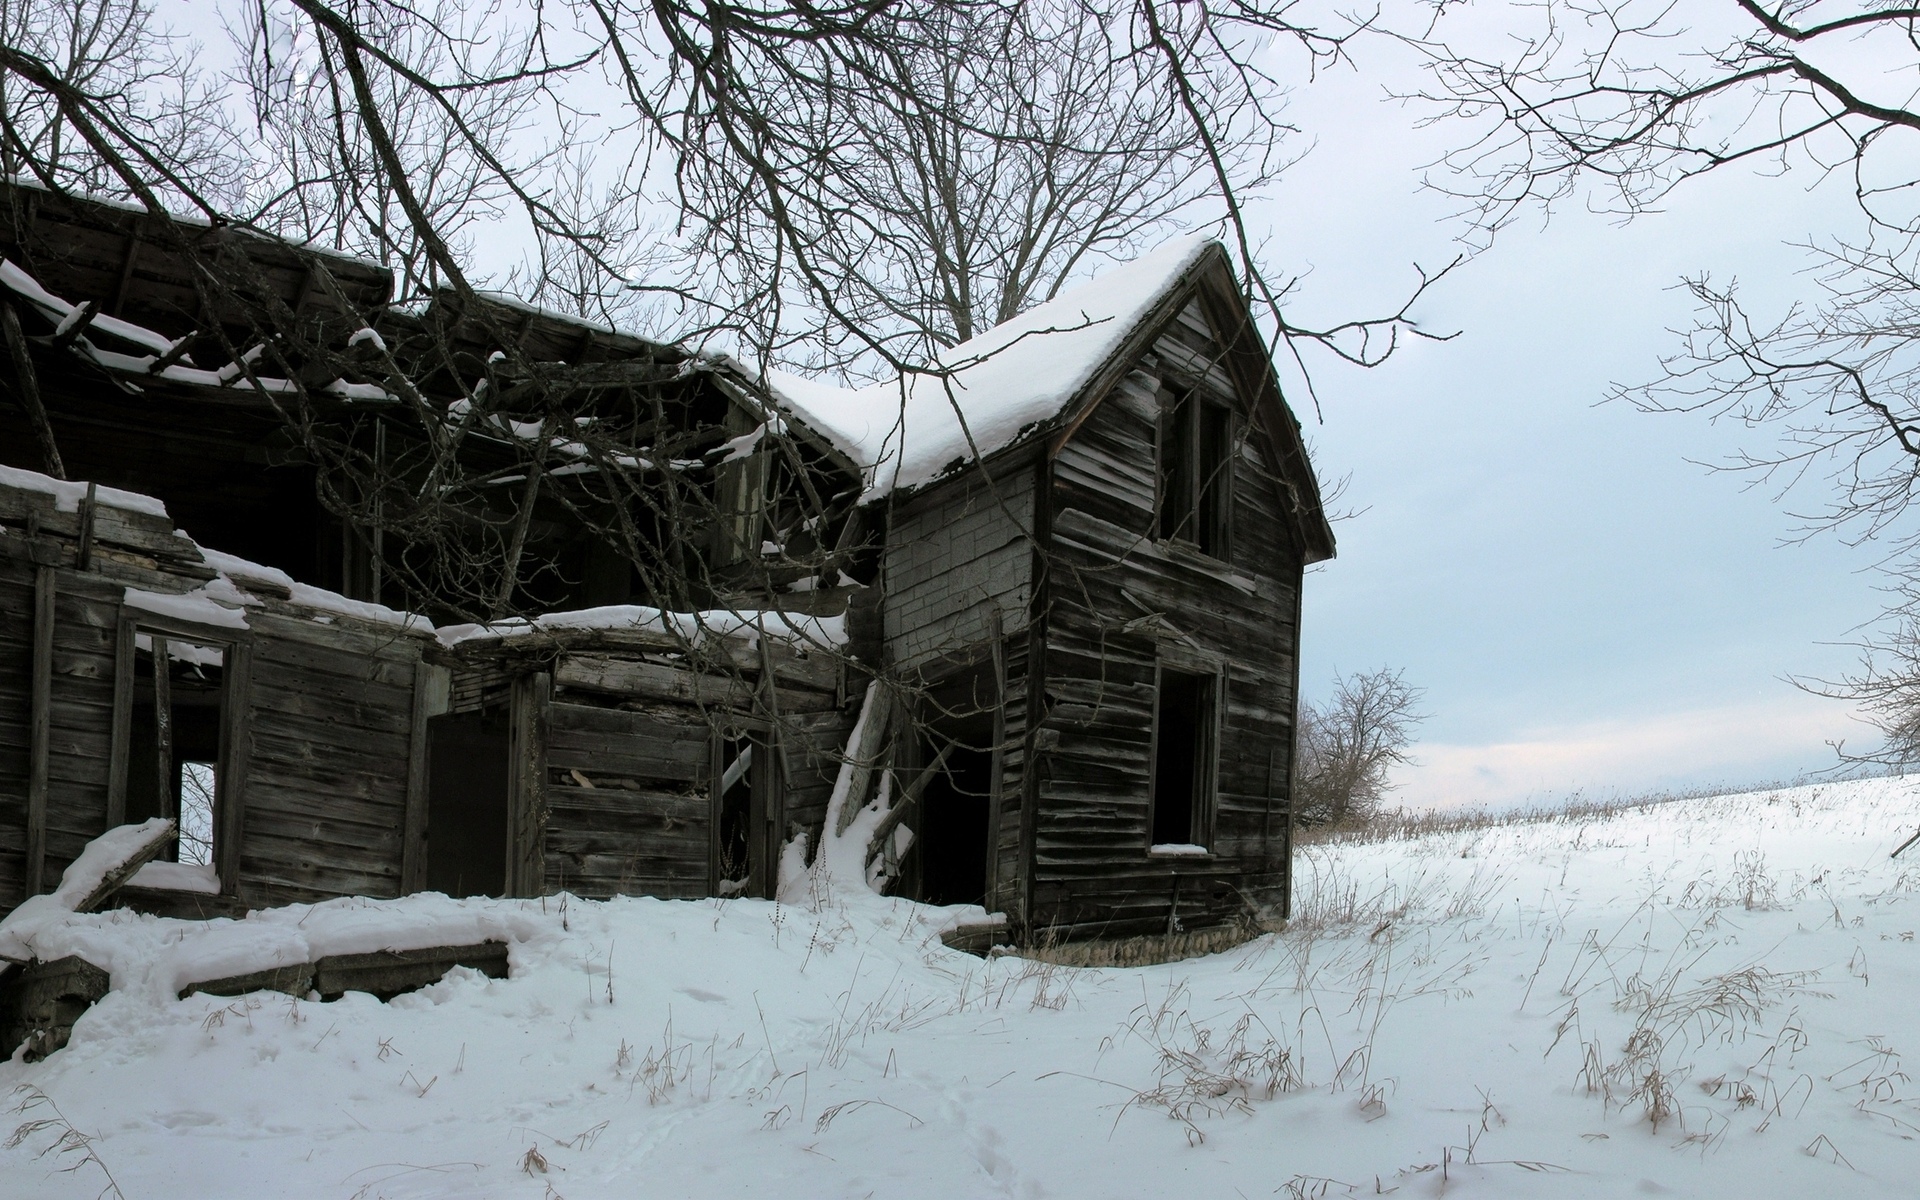 world, Architecture, Houses, Buildings, Decay, Ruin, Retro, Old, Wood, Window, Antique, Nature, Landscapes, Fields, Farm, Trees, Winter, Snow, Seasons Wallpaper